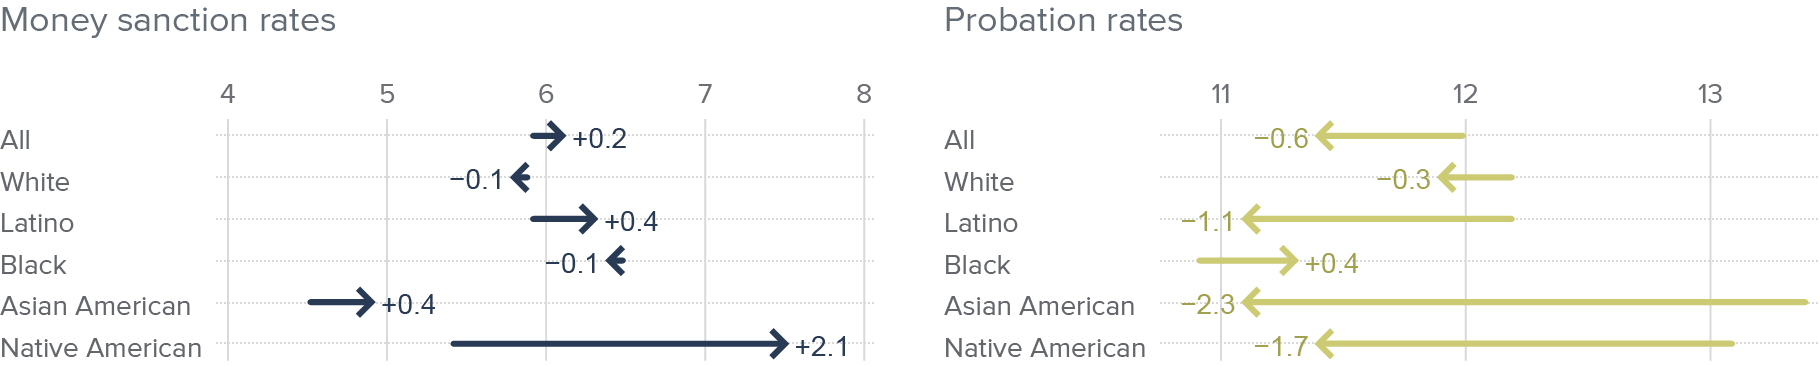 figure 4 - Racial gaps in money sanctions increased, whereas racial gaps in probation decreased amid the pandemic